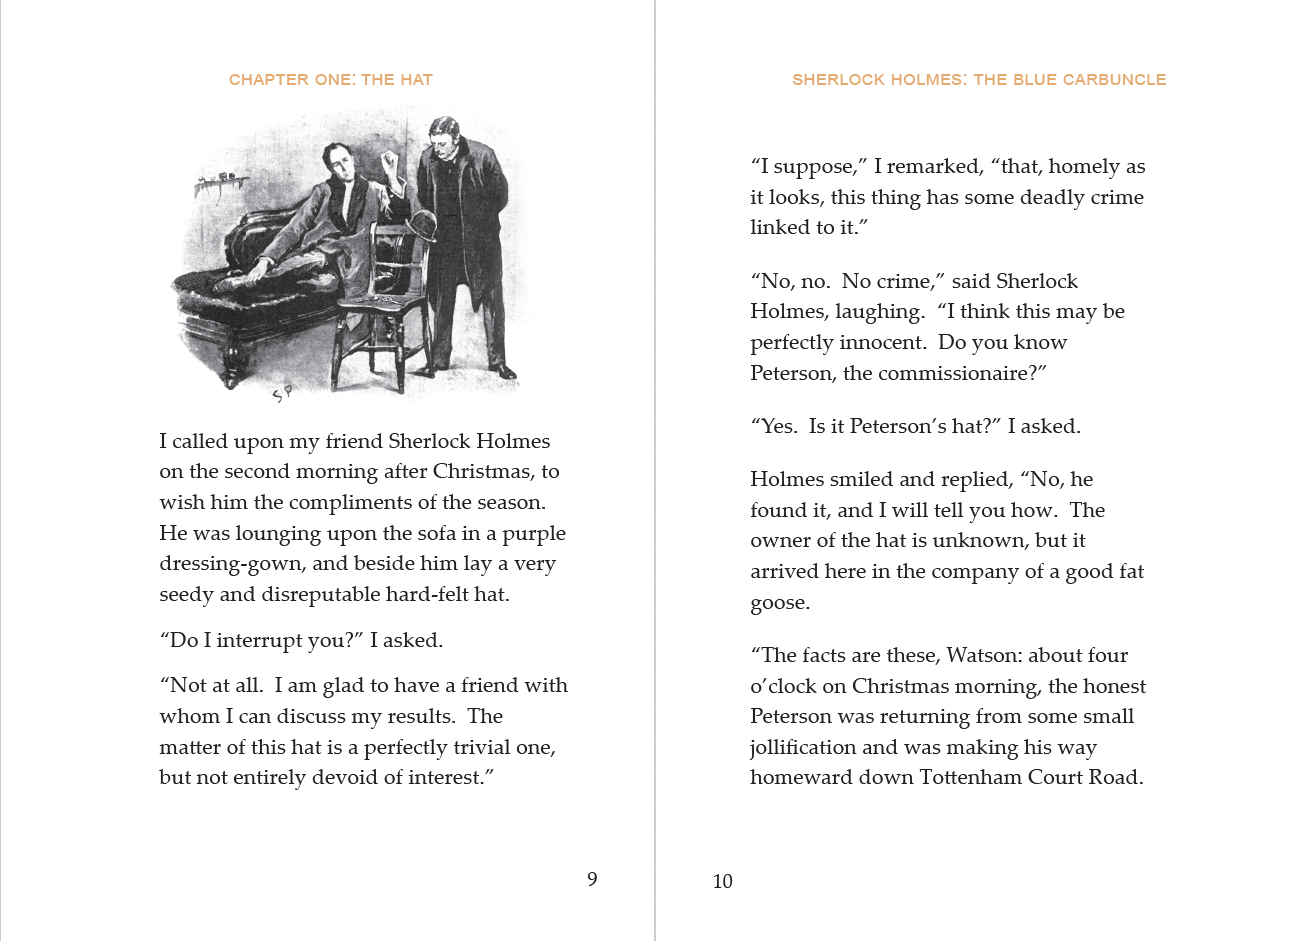 Sherlock Holmes book spread. Pgs 9-10. Pg 9 has an illustration of Sherlock talking to someone as he inspects a hat